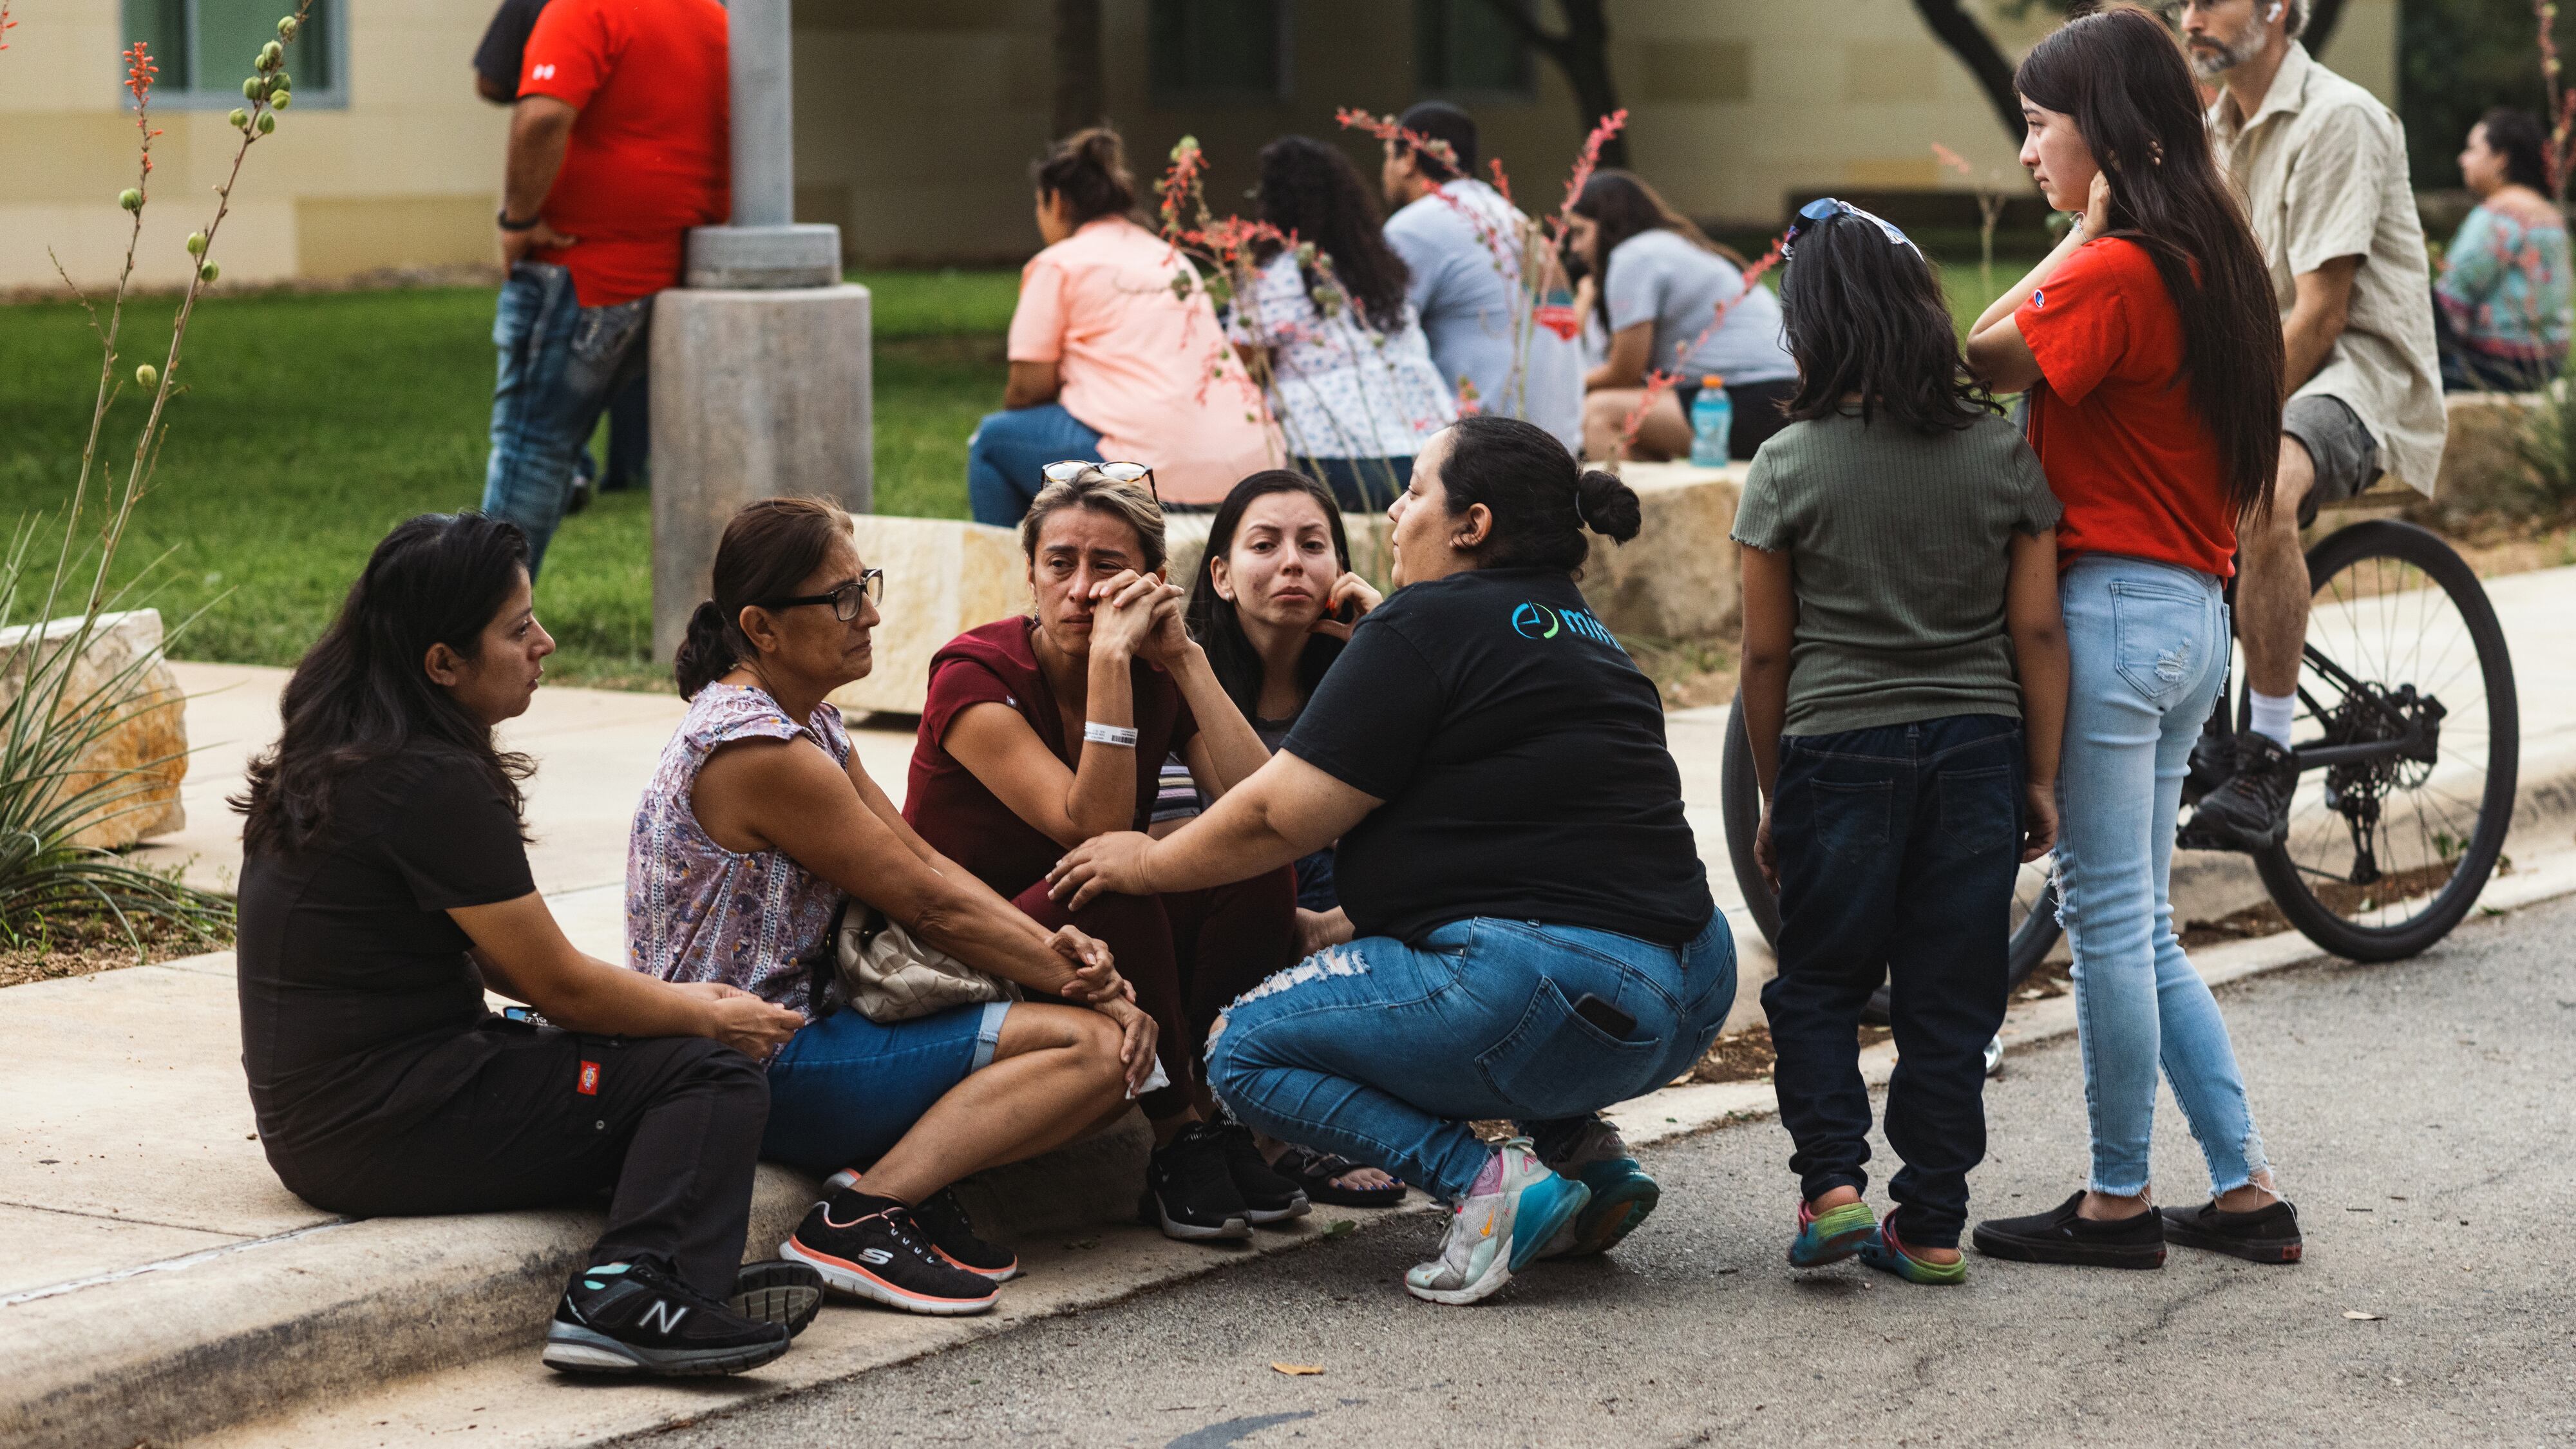 Community members grieve on a sidewalk after a mass shooting in Uvalde, Texas.